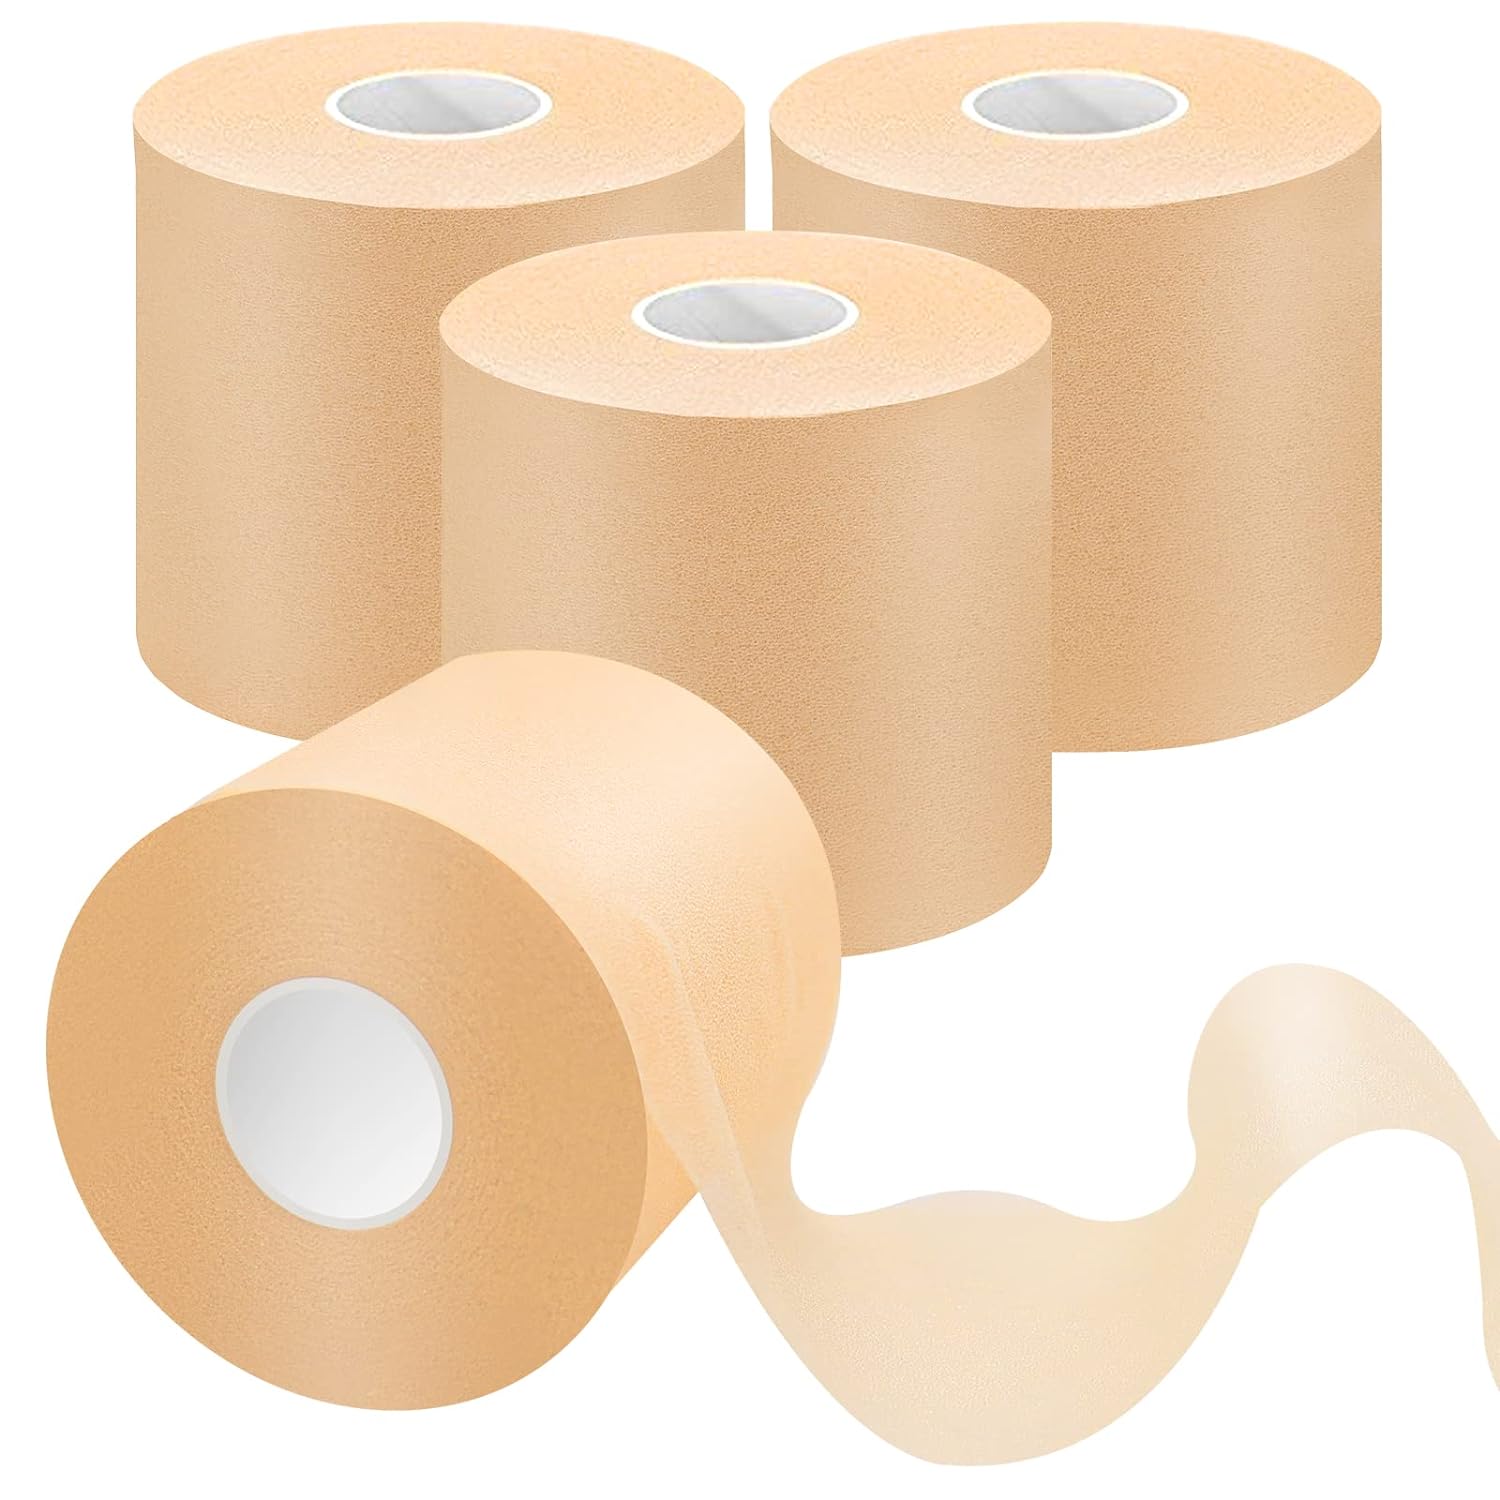 Limited-Time Discount! Dimora 4-Rolls Pre Wrap Tape - Save 16% Now